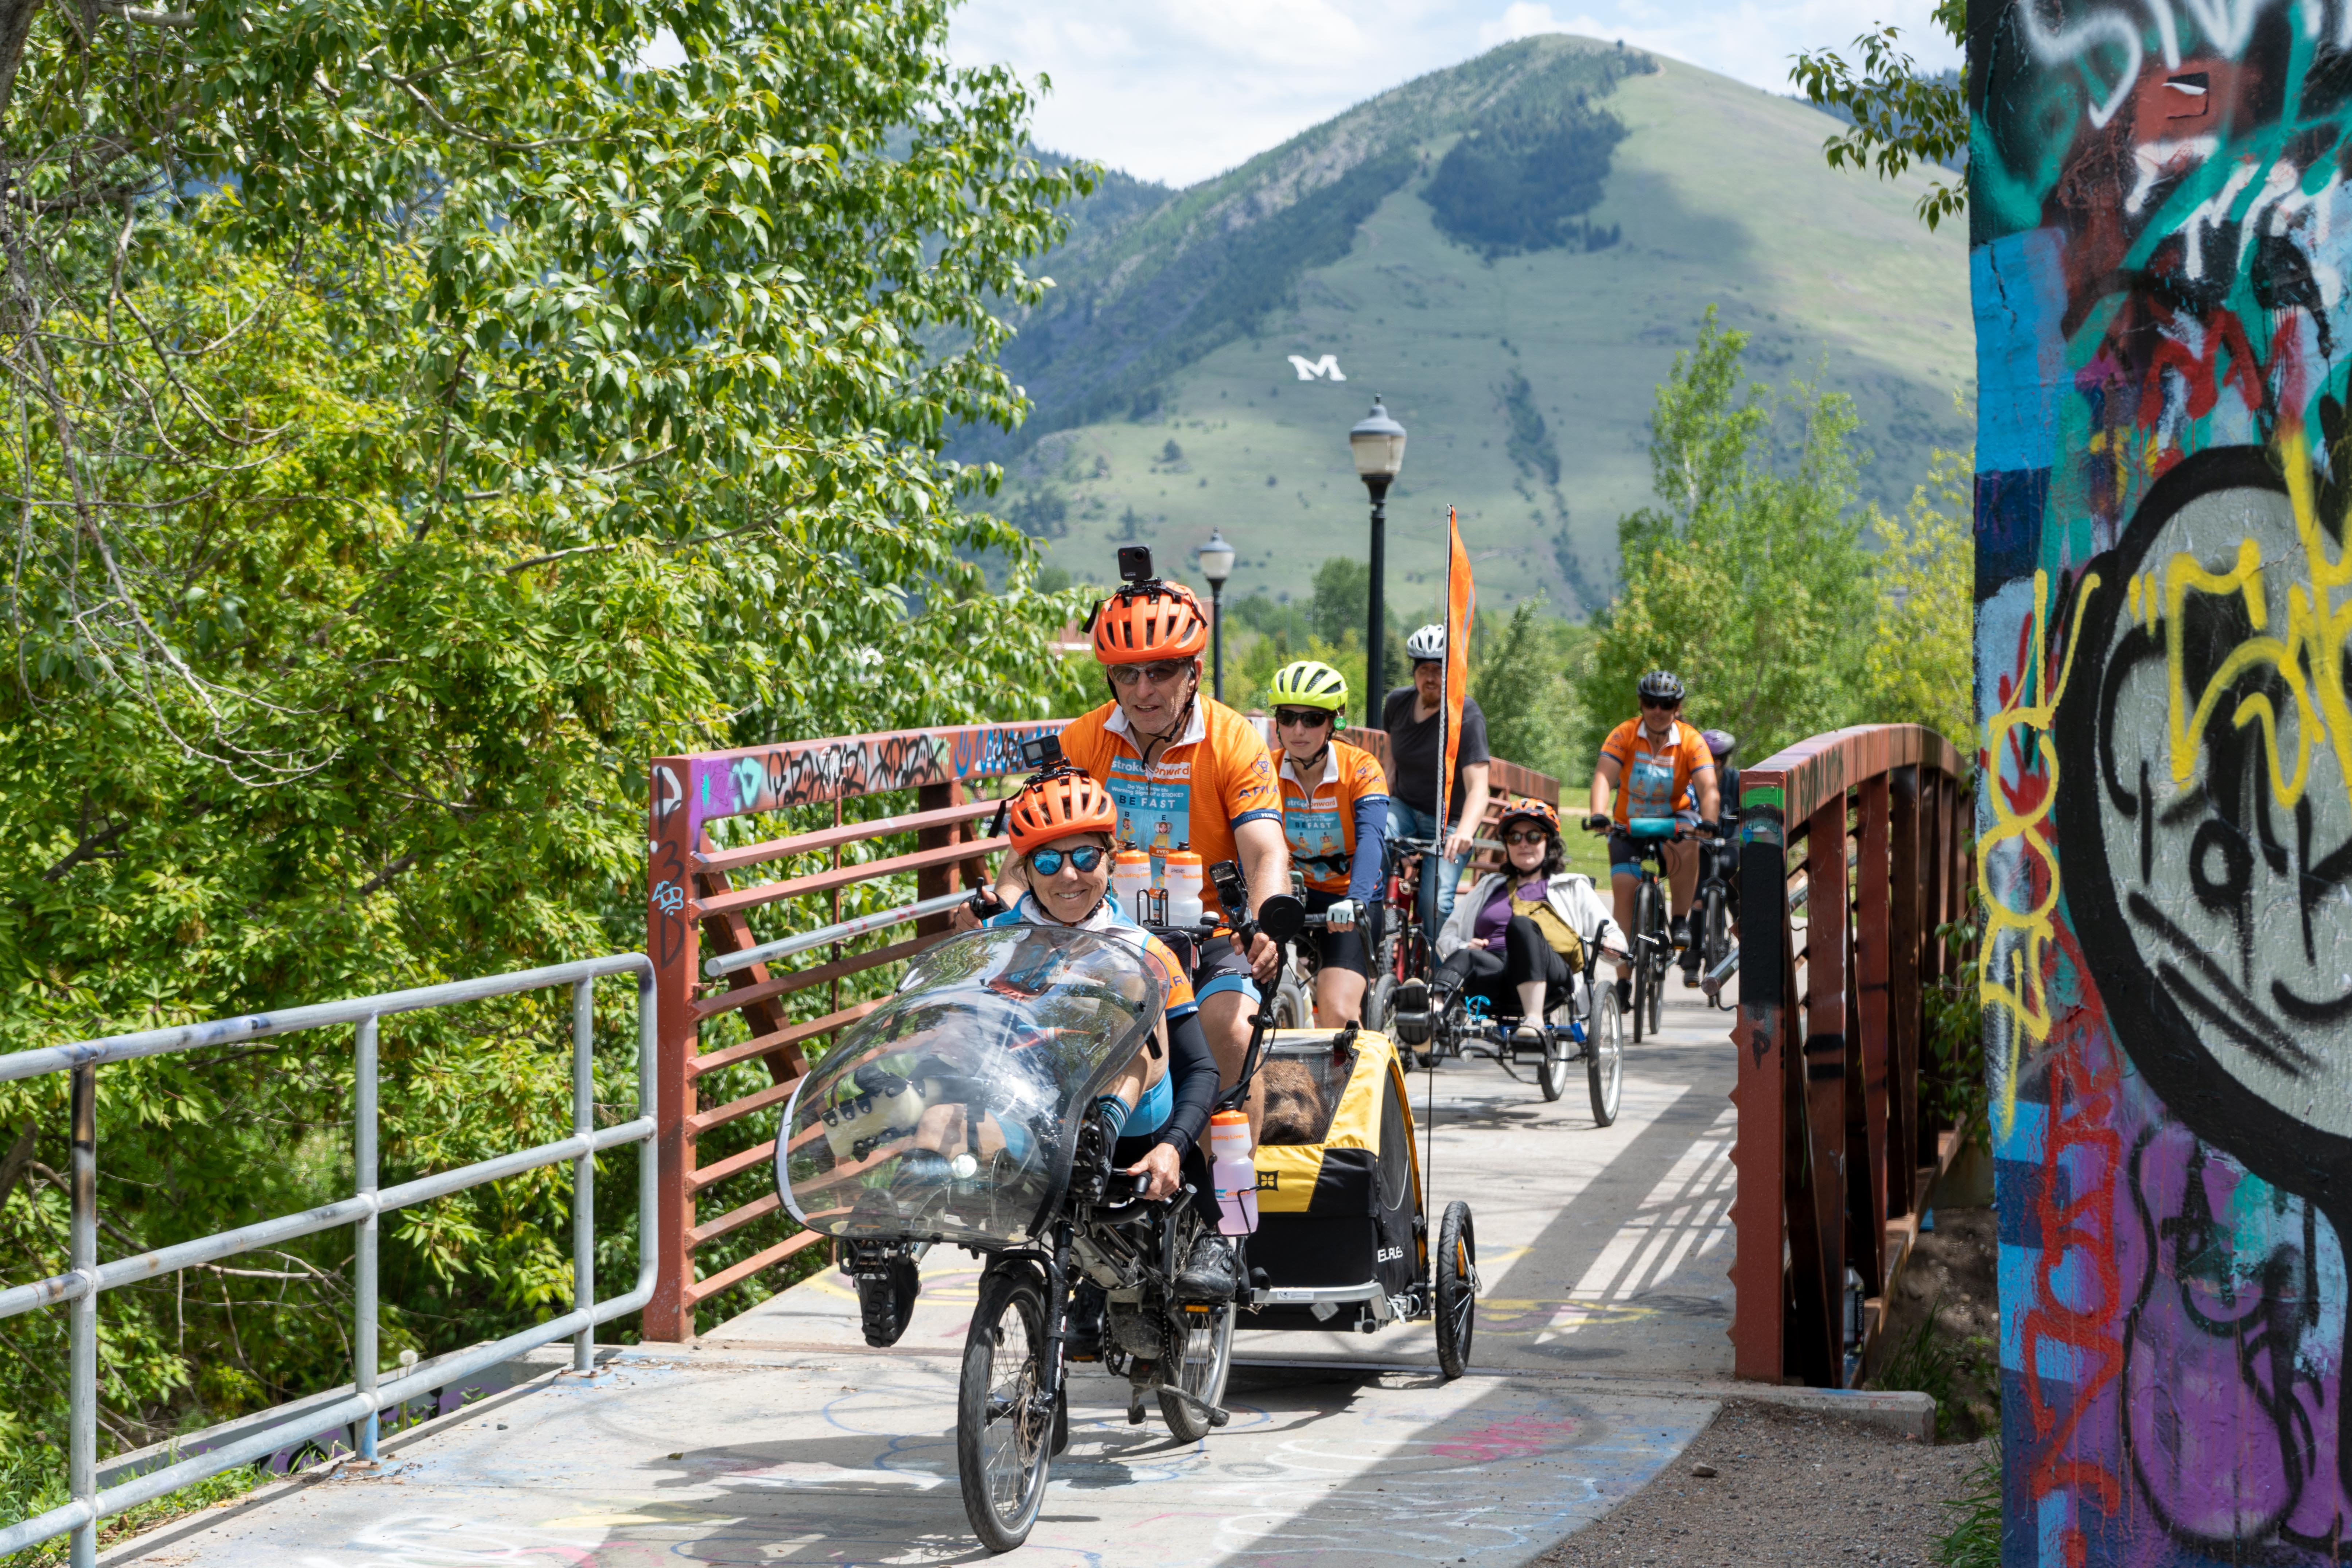 Debra Meyerson and Steve Zuckerman arrive with a group of cyclists in Missoula, Montana.